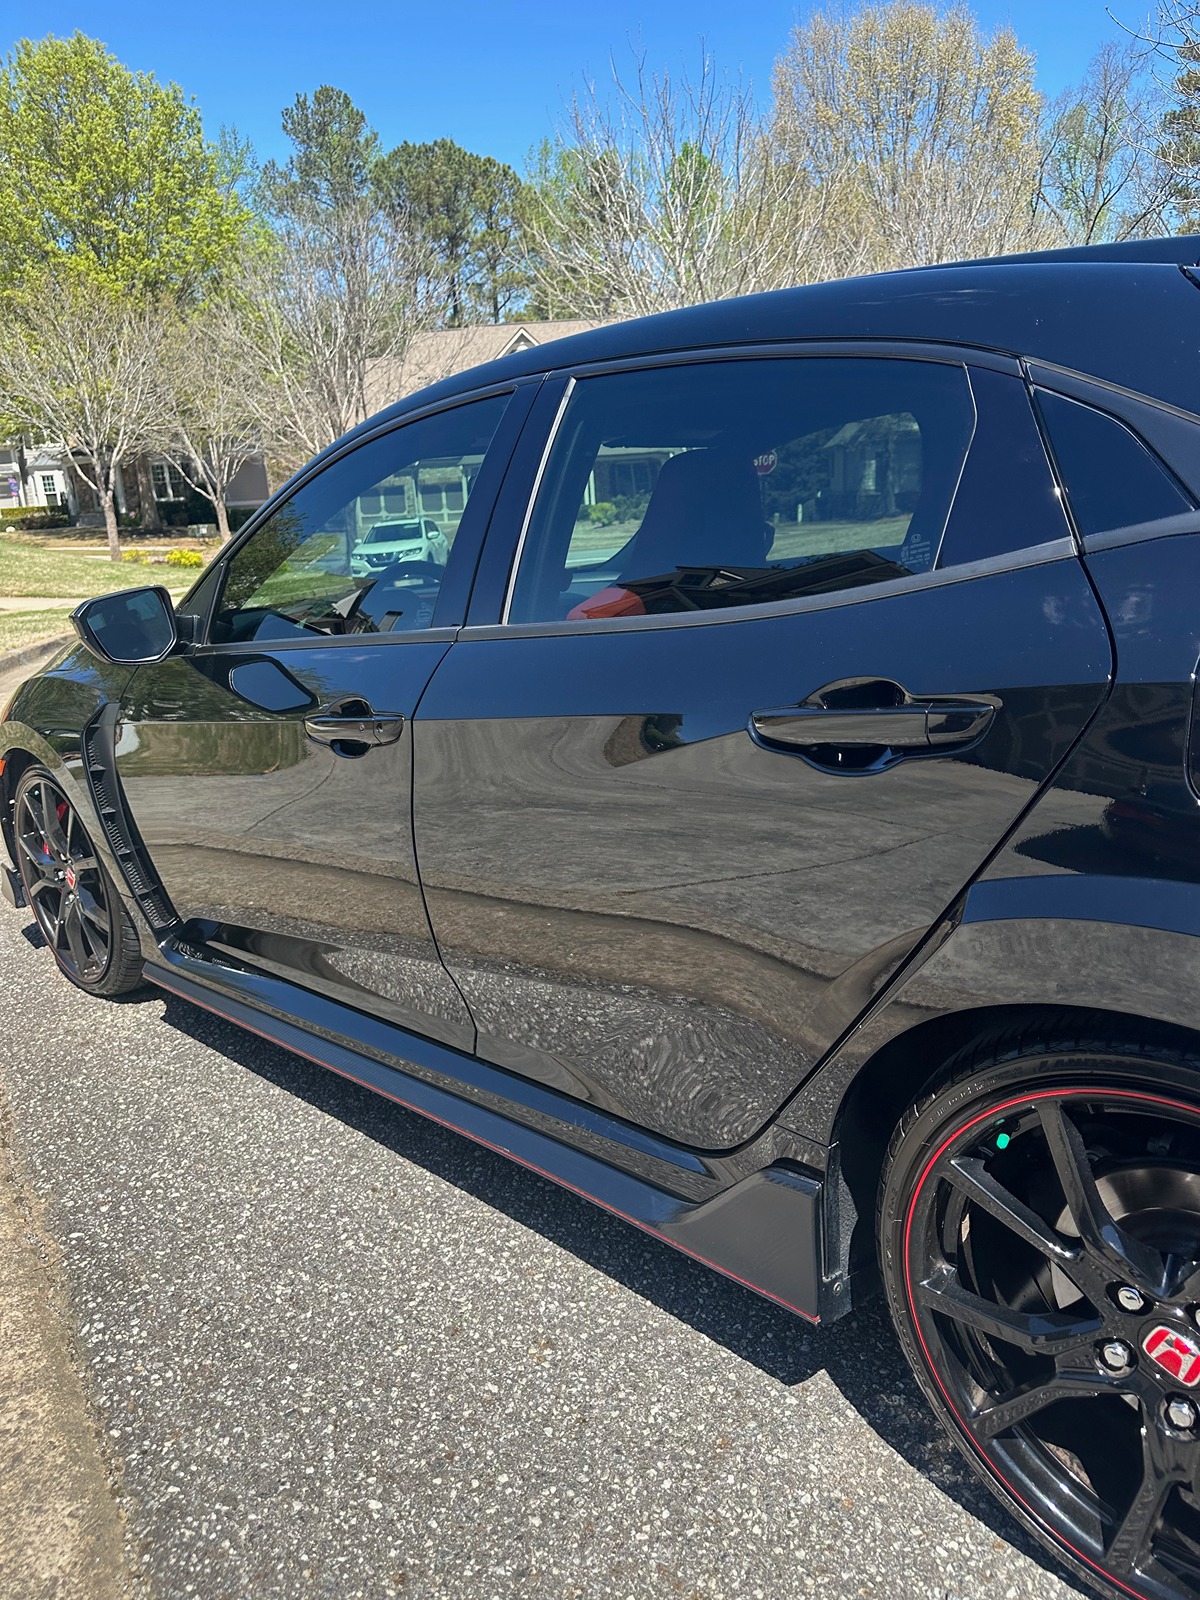 Honda Civic 10th gen Sold. 2019 Civic Type R for sale IMG_8146